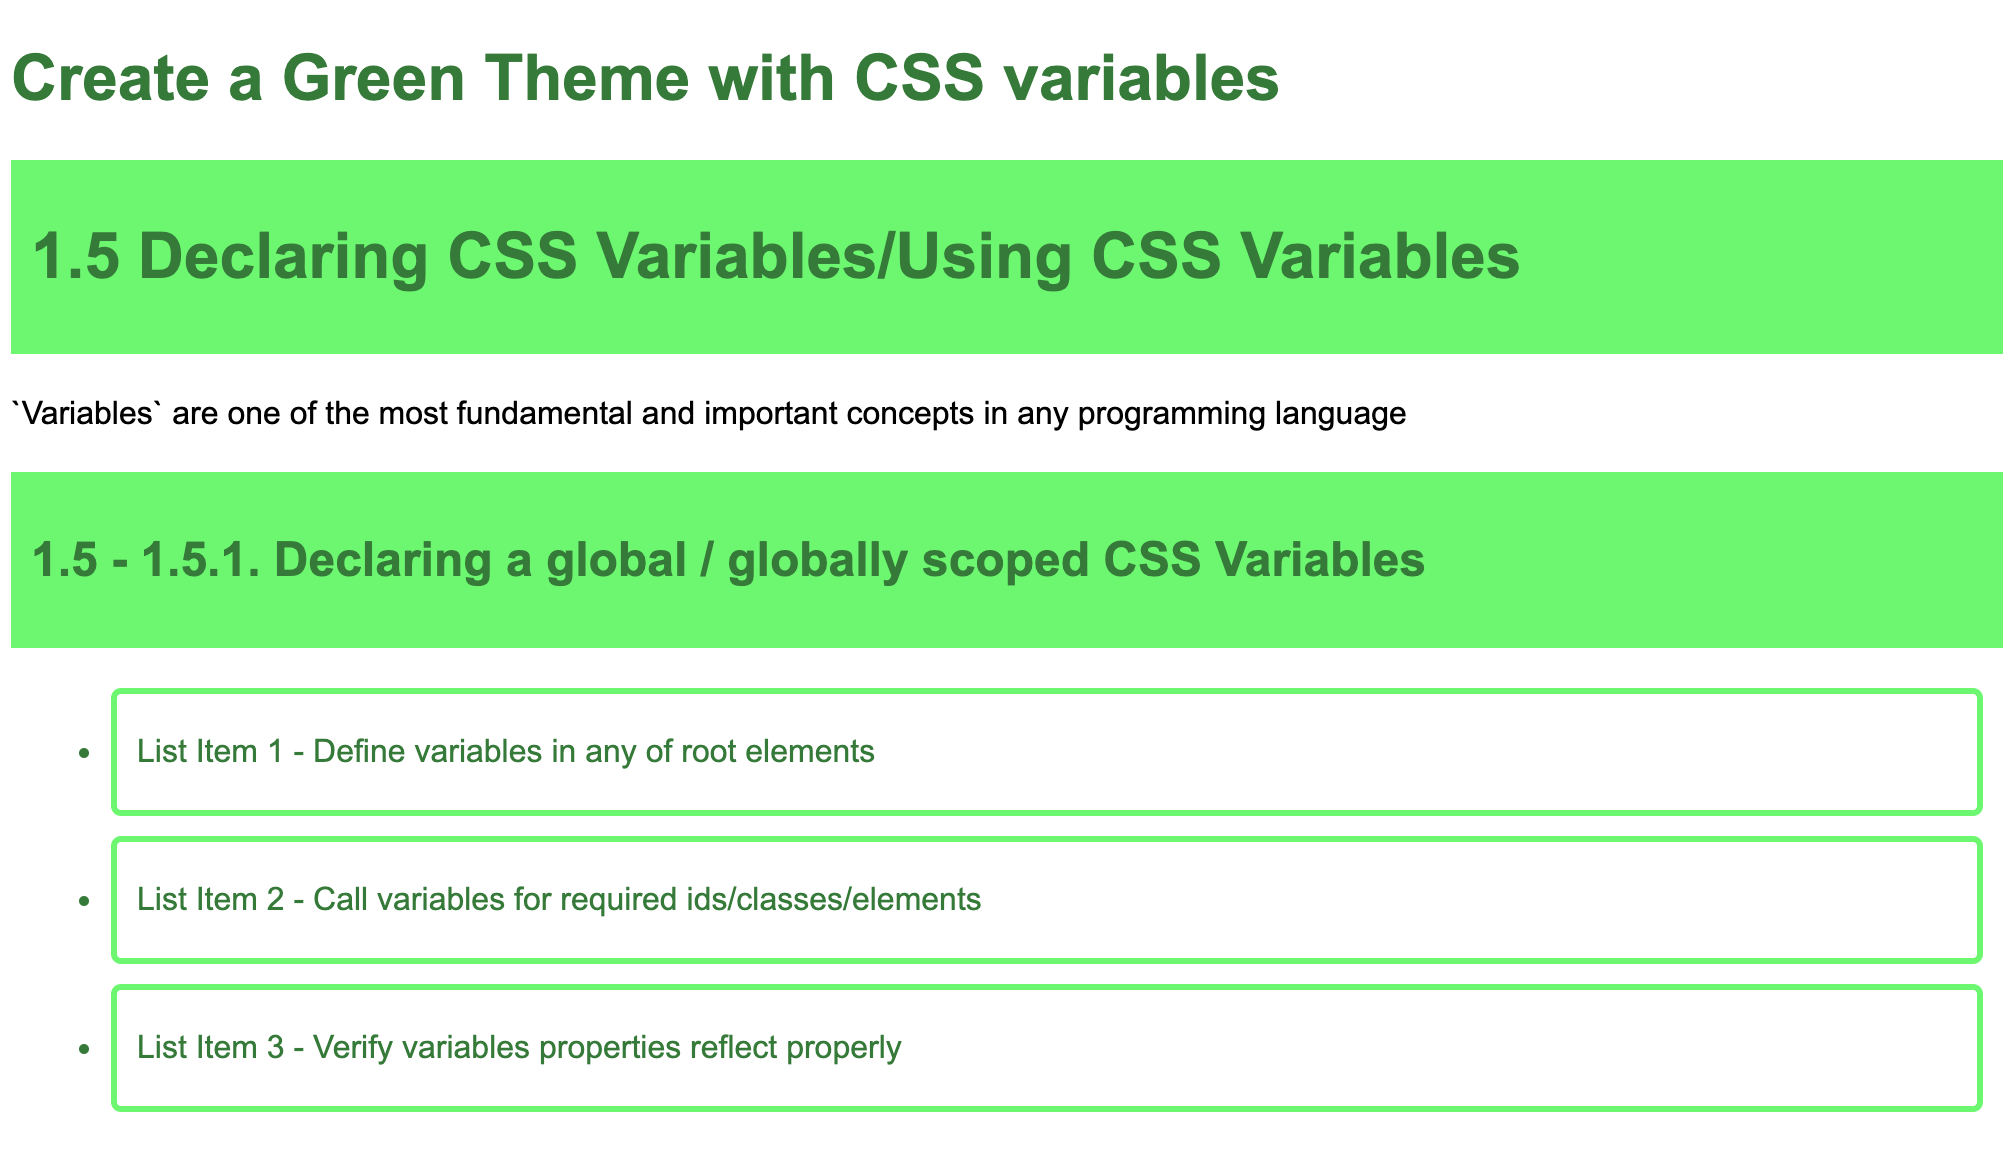 Declaring & Using CSS Variables - Create a Green Theme